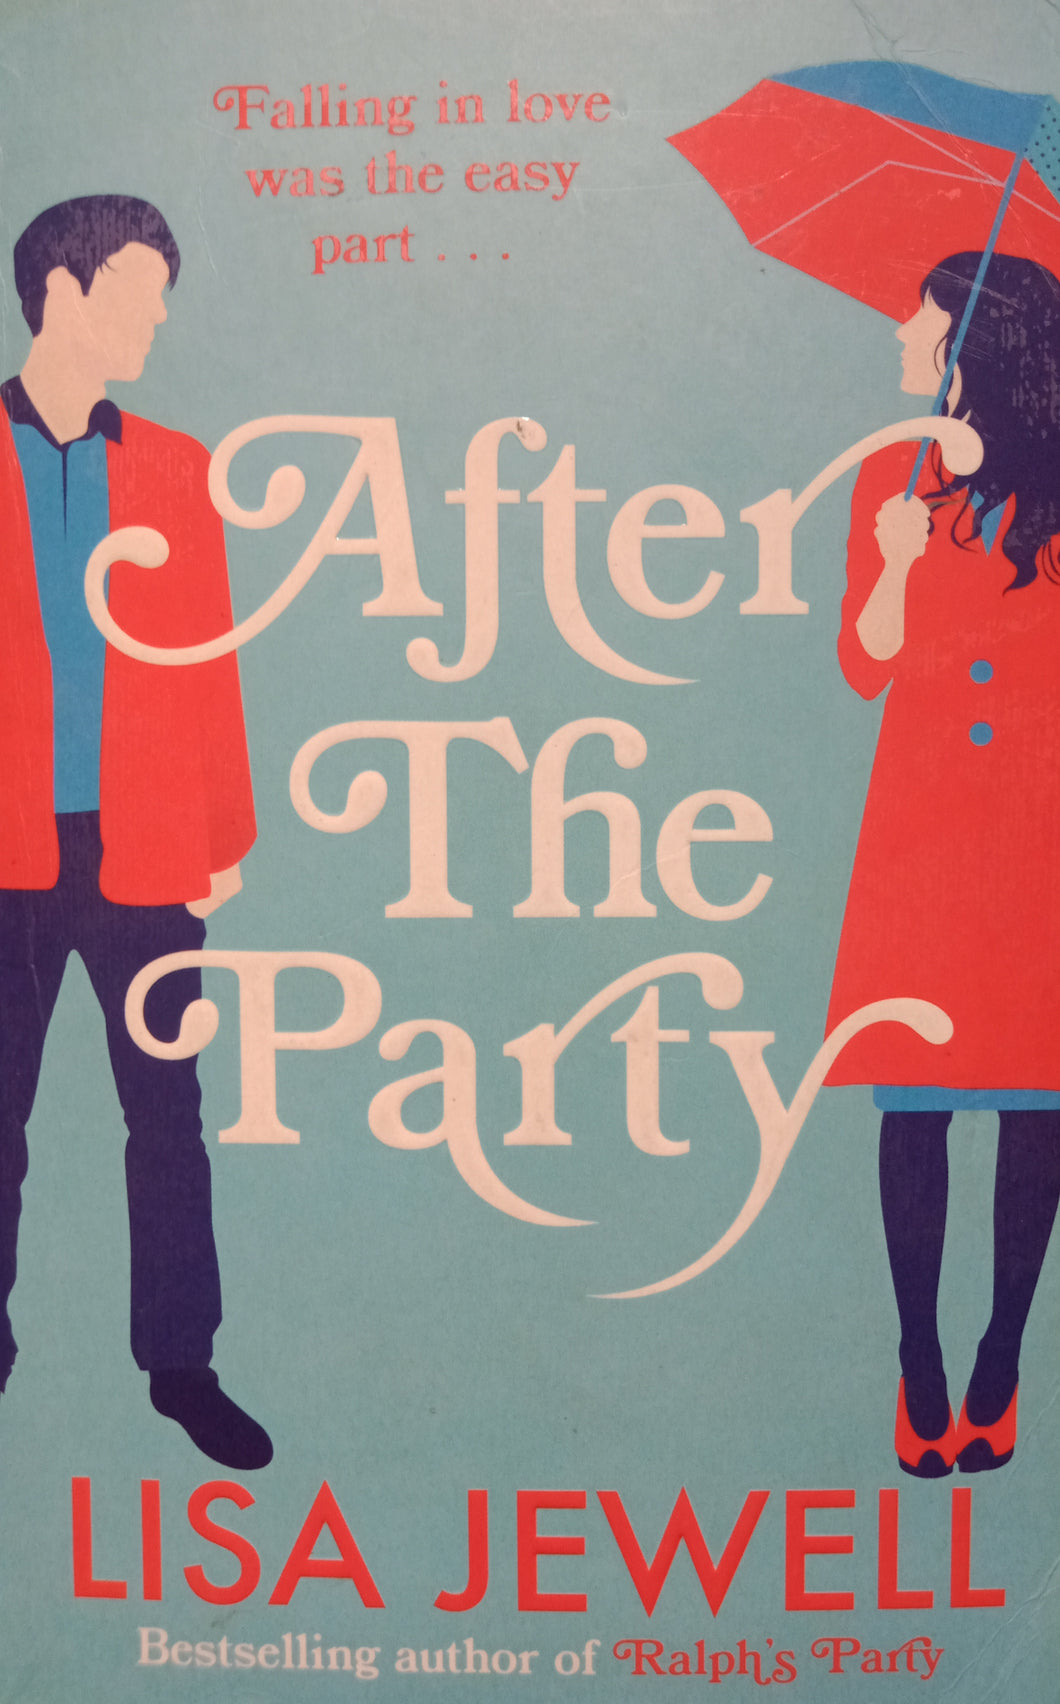 After The Party by Lisa Jewell